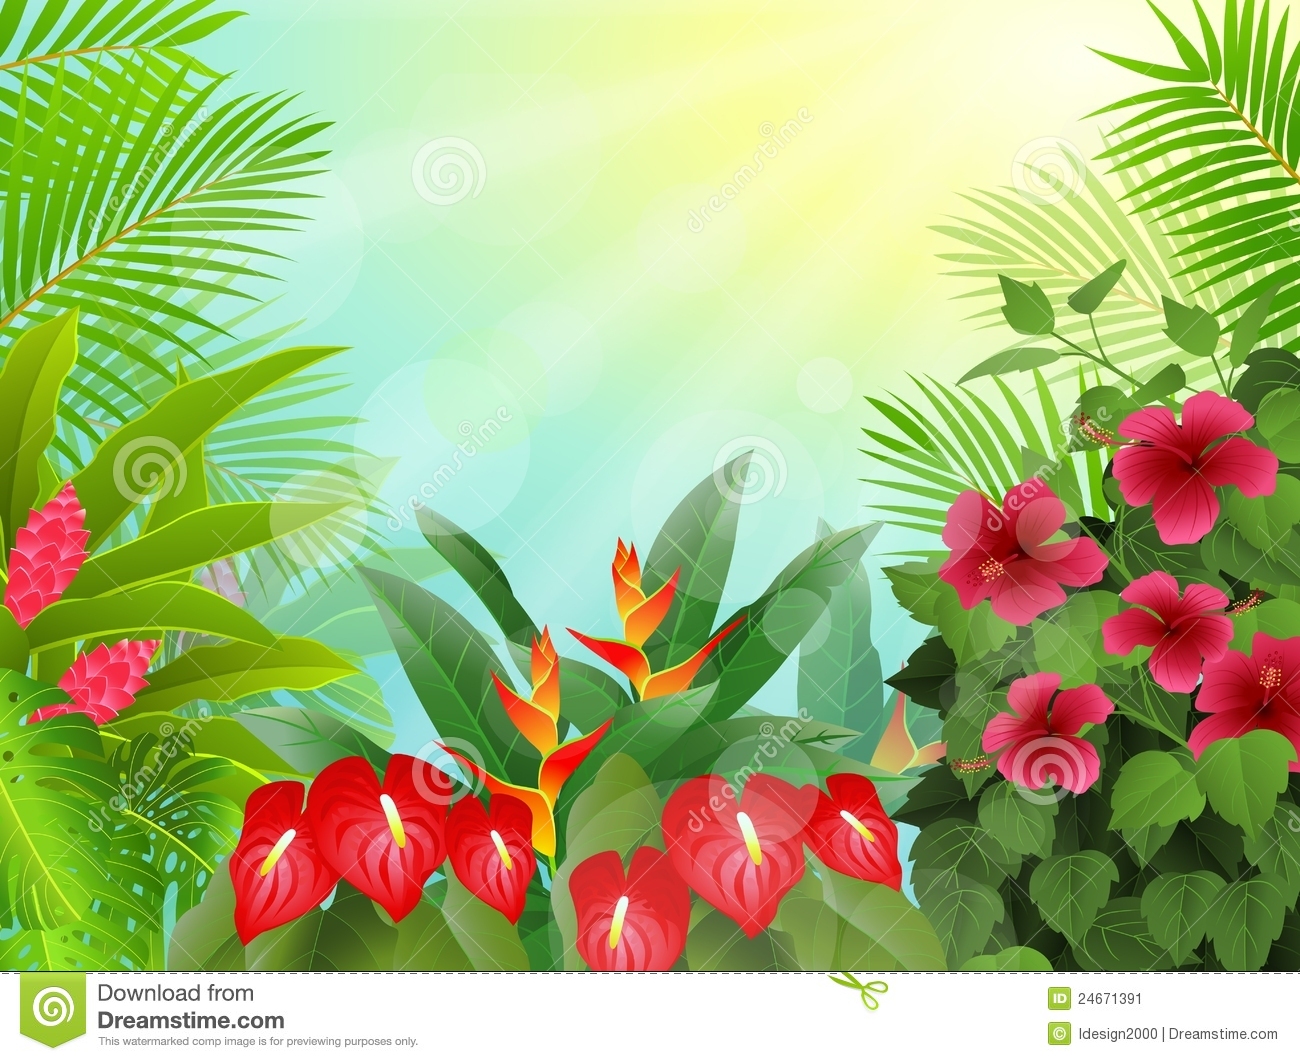 Forest Background Clipart.